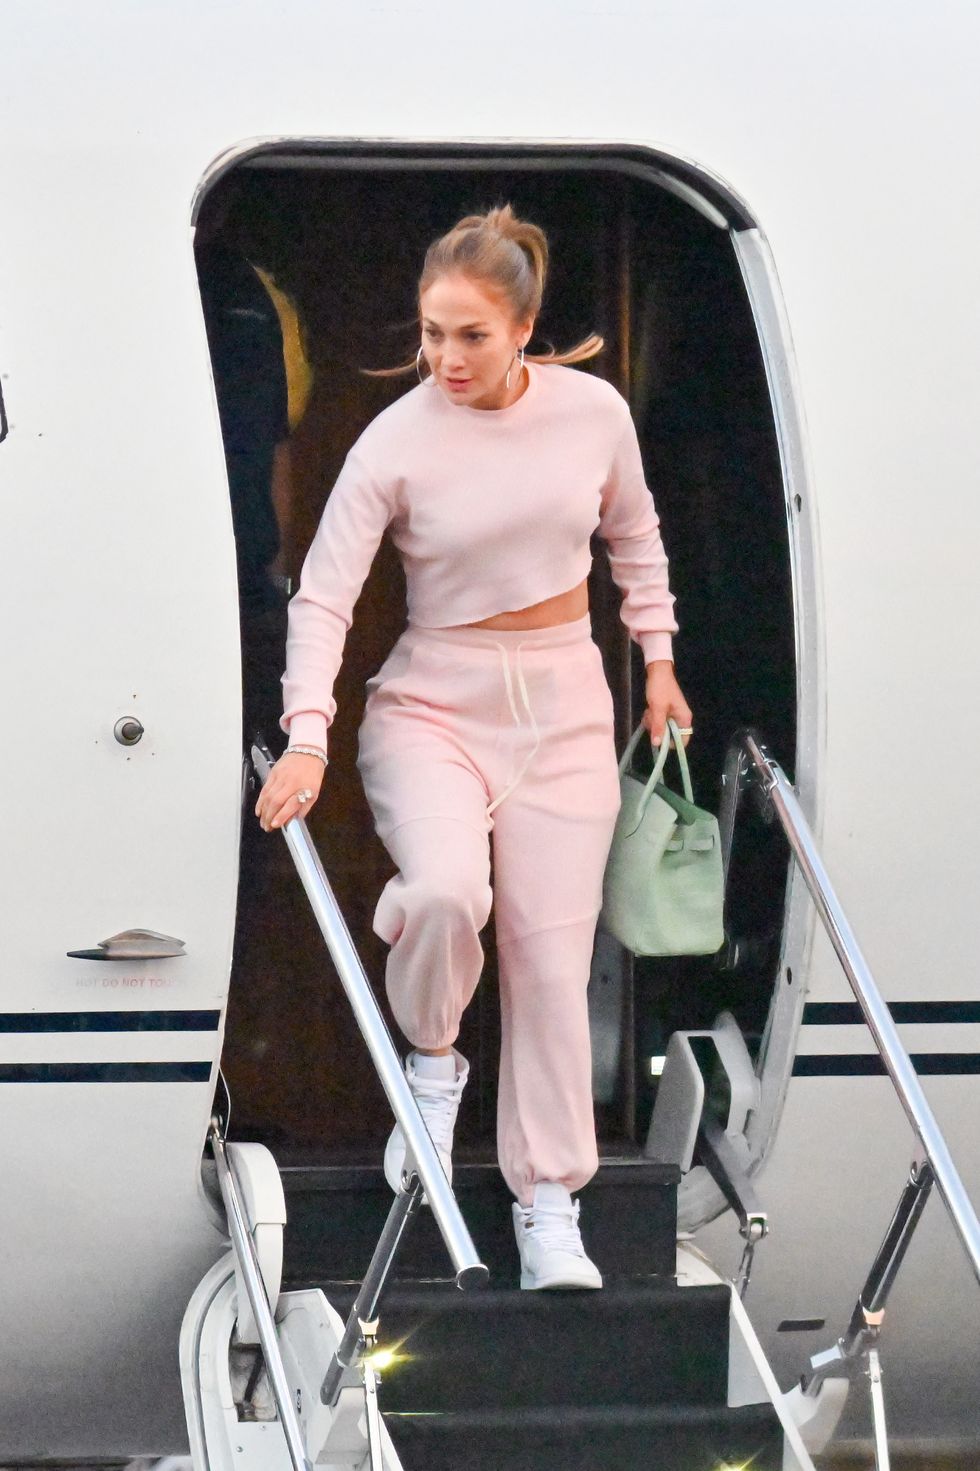 jennifer lopez leaving her private jet in a pink sweat suit